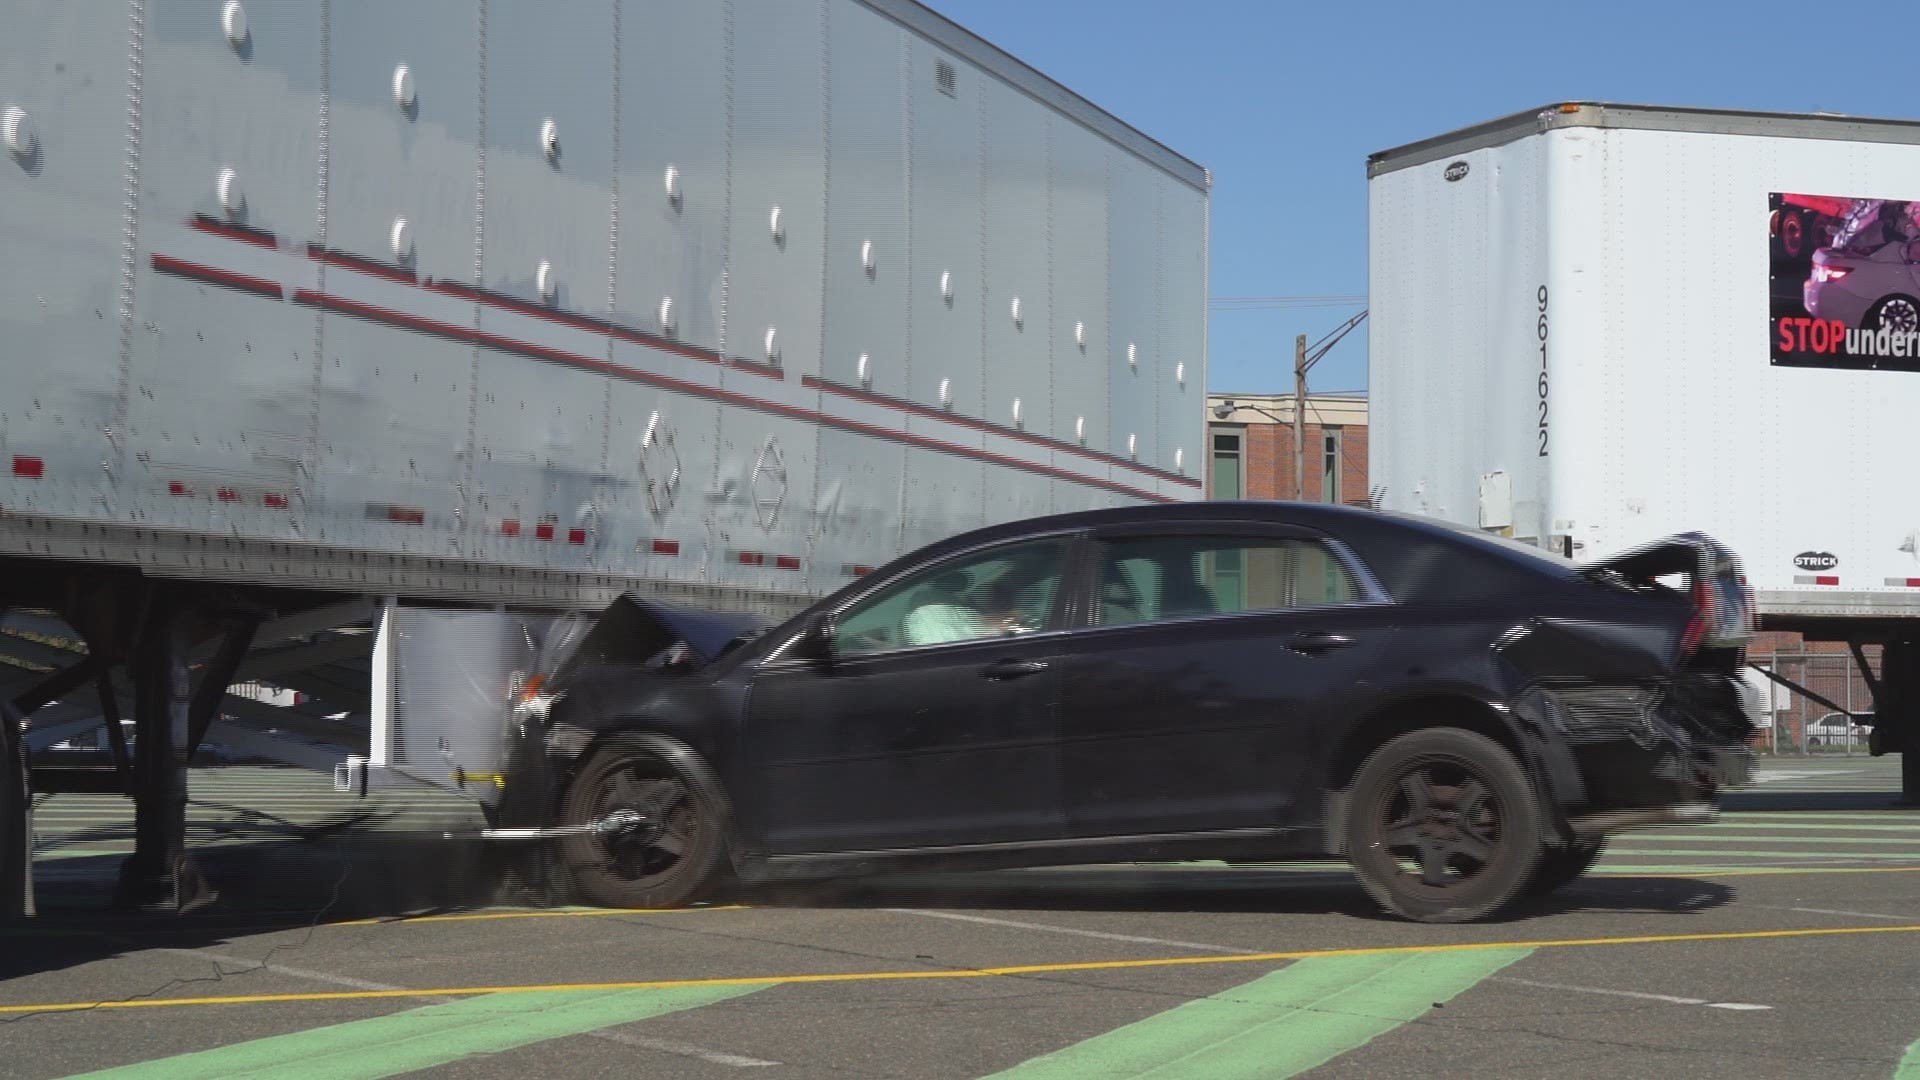 WUSA9's dramatic crash tests outside Audi Field to show dangers of semi-trailer.